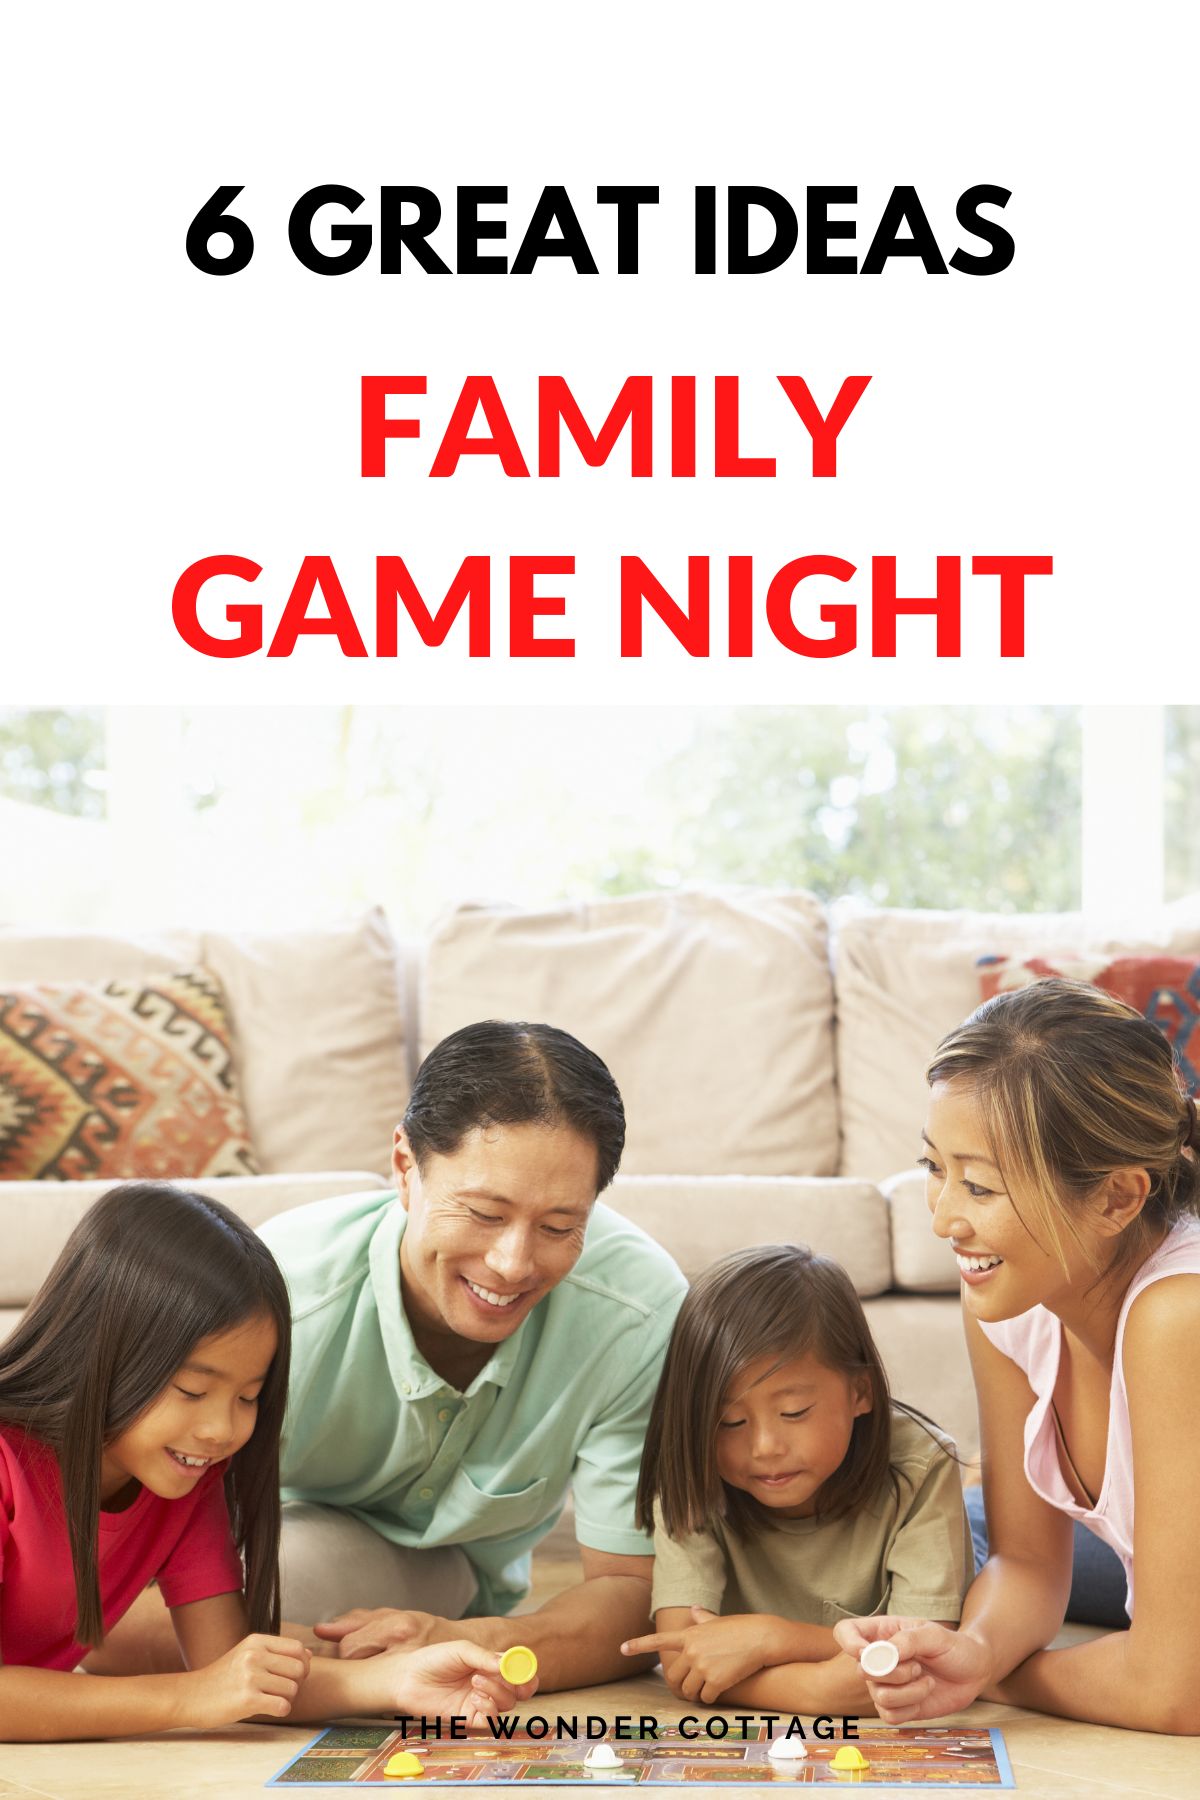 6 Great Ideas for Family Game Night